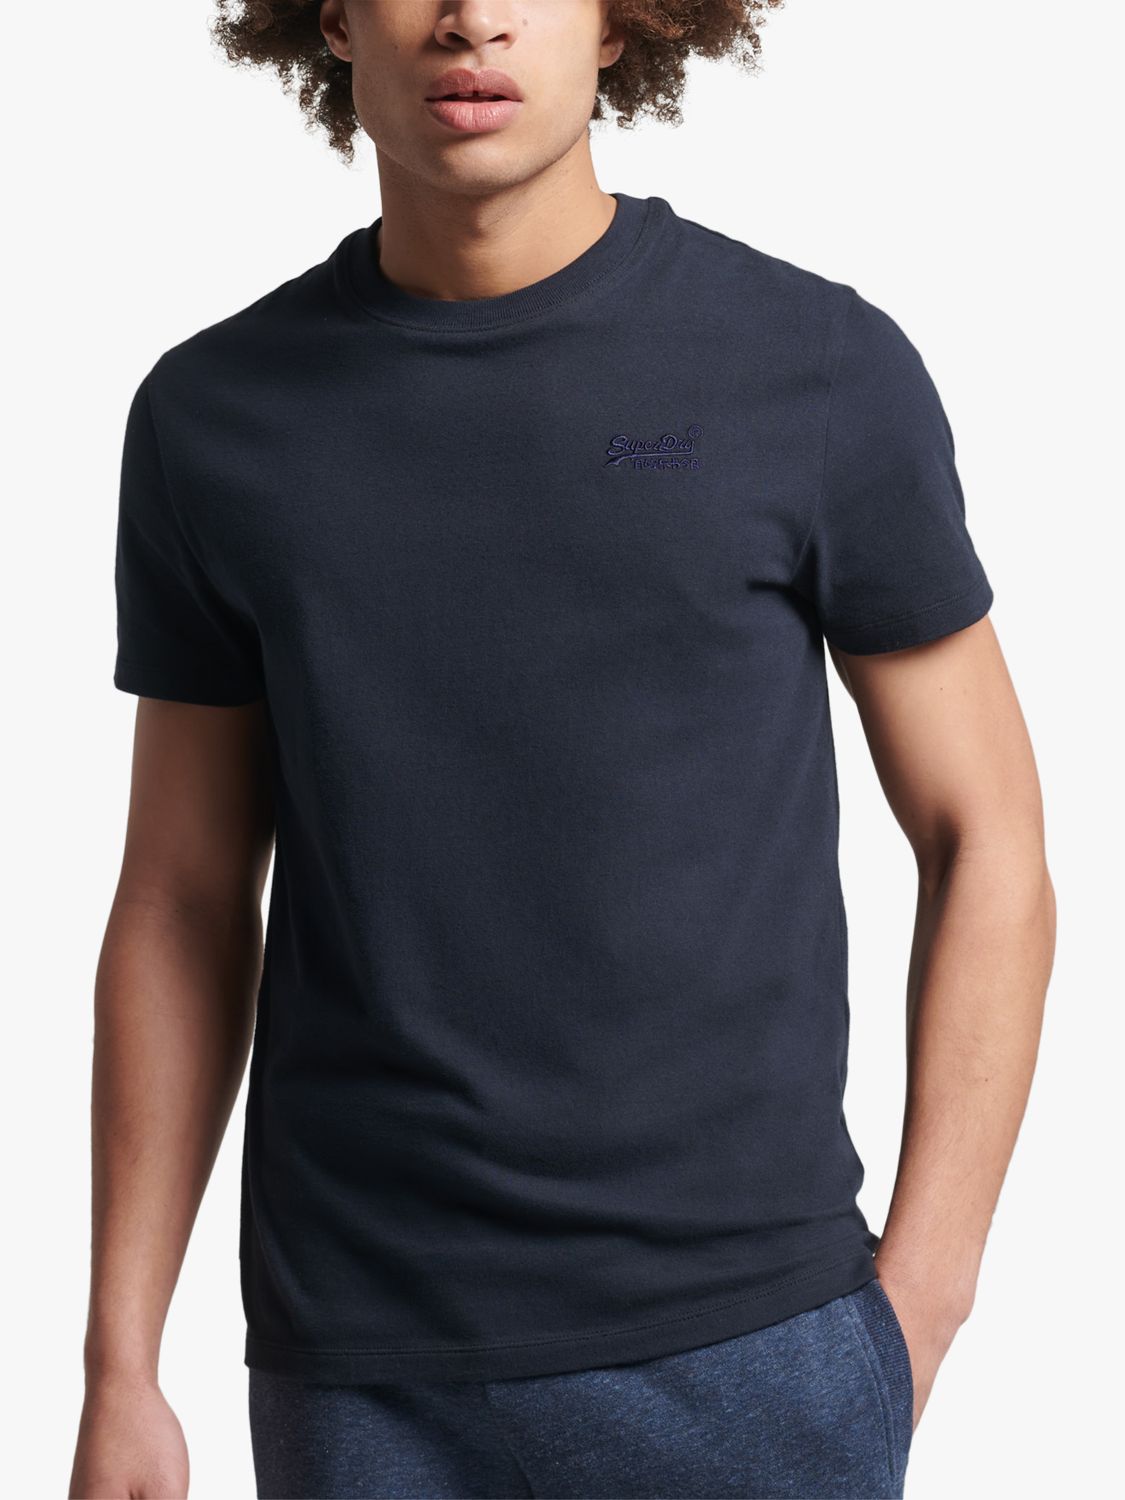 Superdry Organic Cotton Vintage Logo T-Shirt, Eclipse & Partners Embroidered Navy Lewis John at